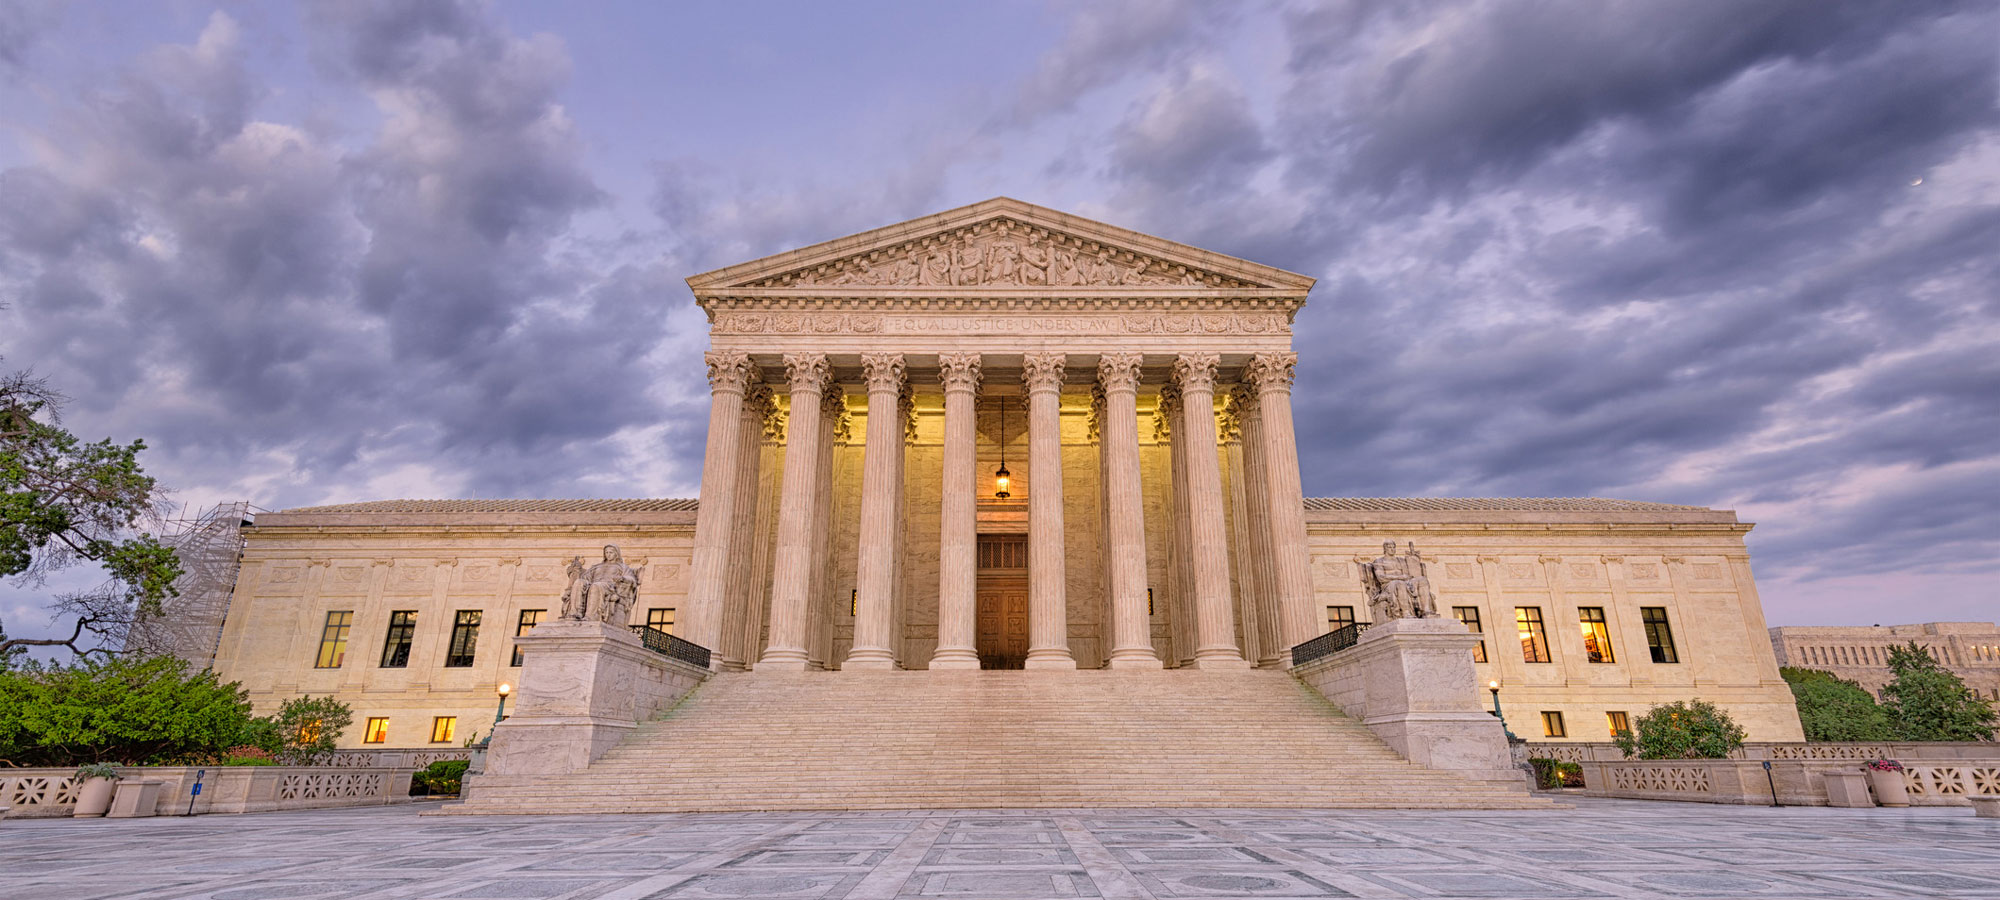 United States Supreme Court Building in Washington DC Public Policy